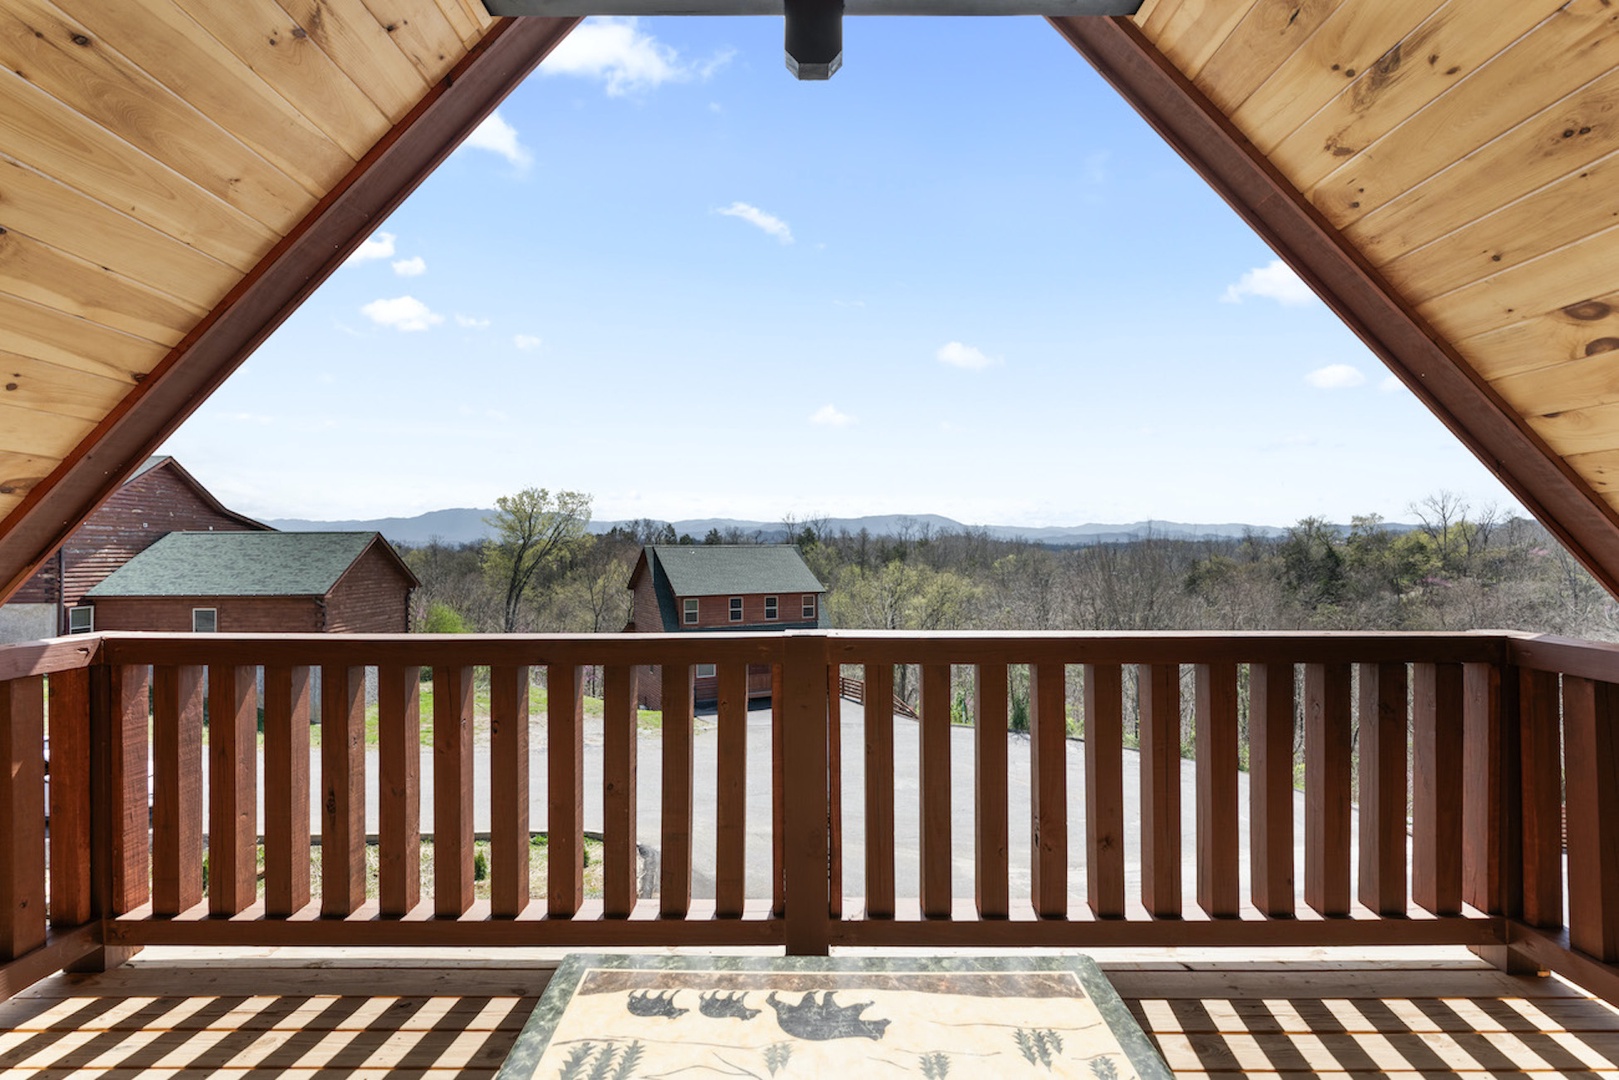 Venture out to one of the two third-floor balconies & soak in the view